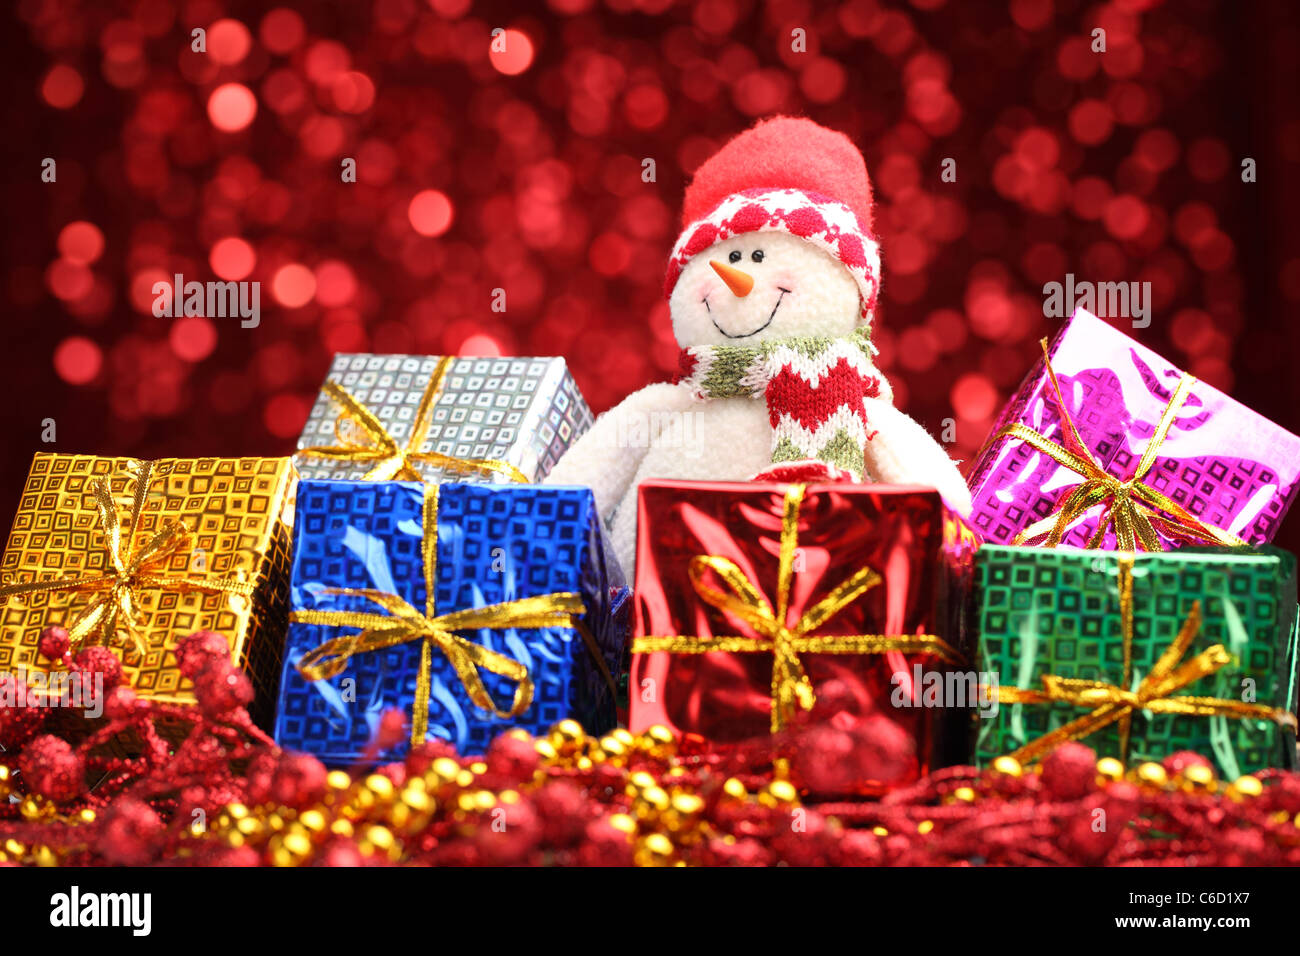 Christmas gifts and snowman over abstract light background. Stock Photo